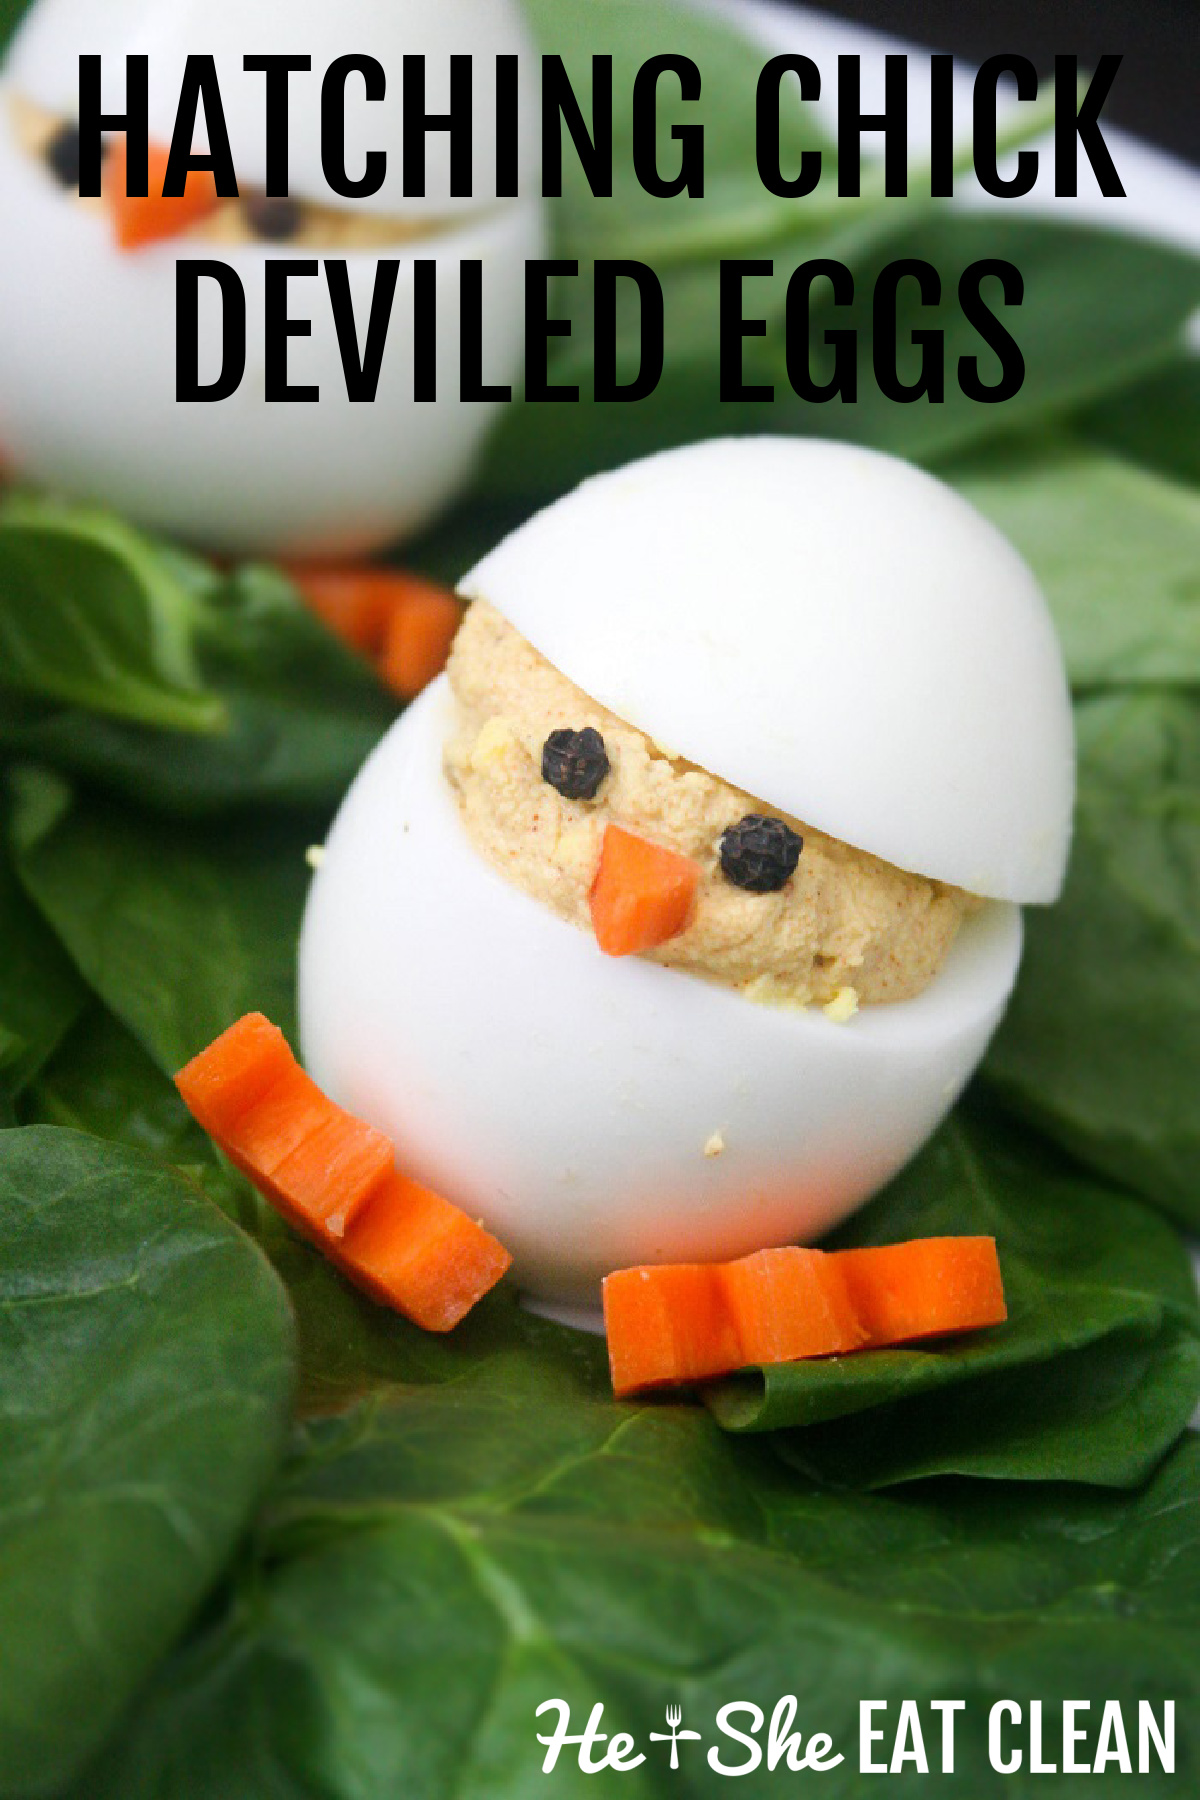 deviled egg made to look like a chick with carrot feet and peppercorn eyes on a bed of spinach